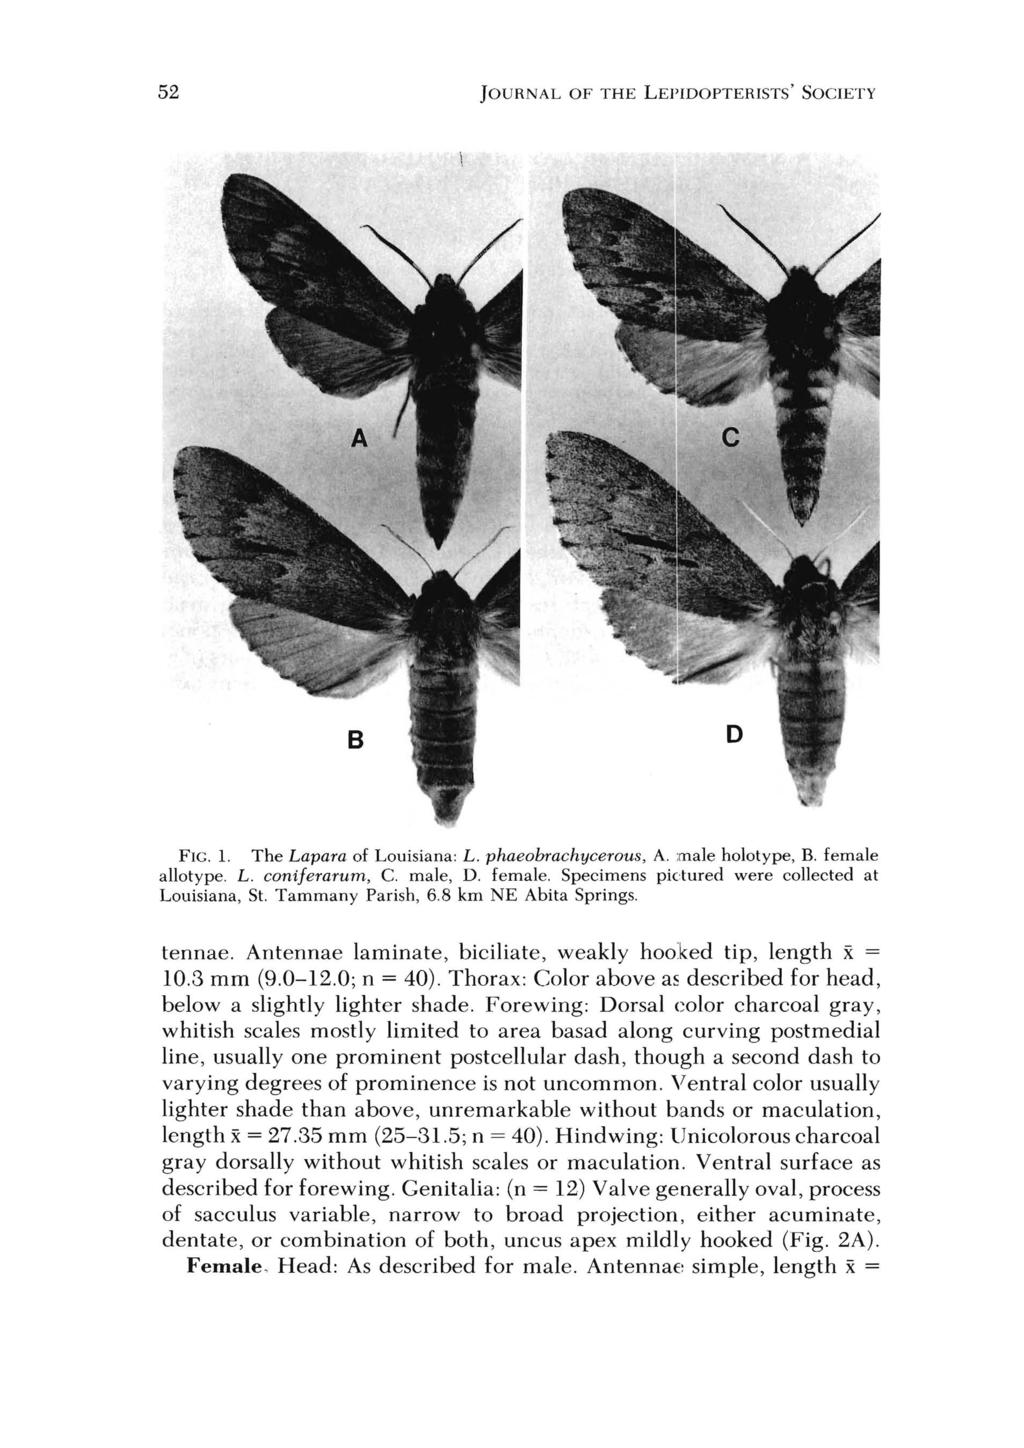 52 JOURNAL OF THE LEPIDOPTERISTS' SOCIETY FIG.!' The Lapara of Louisiana: L. phaeobrachycerous, A. male holotype, B. female allotype. L. coniferarum, C. male, D. female. Specimens pictured were collected at Louisiana, St.